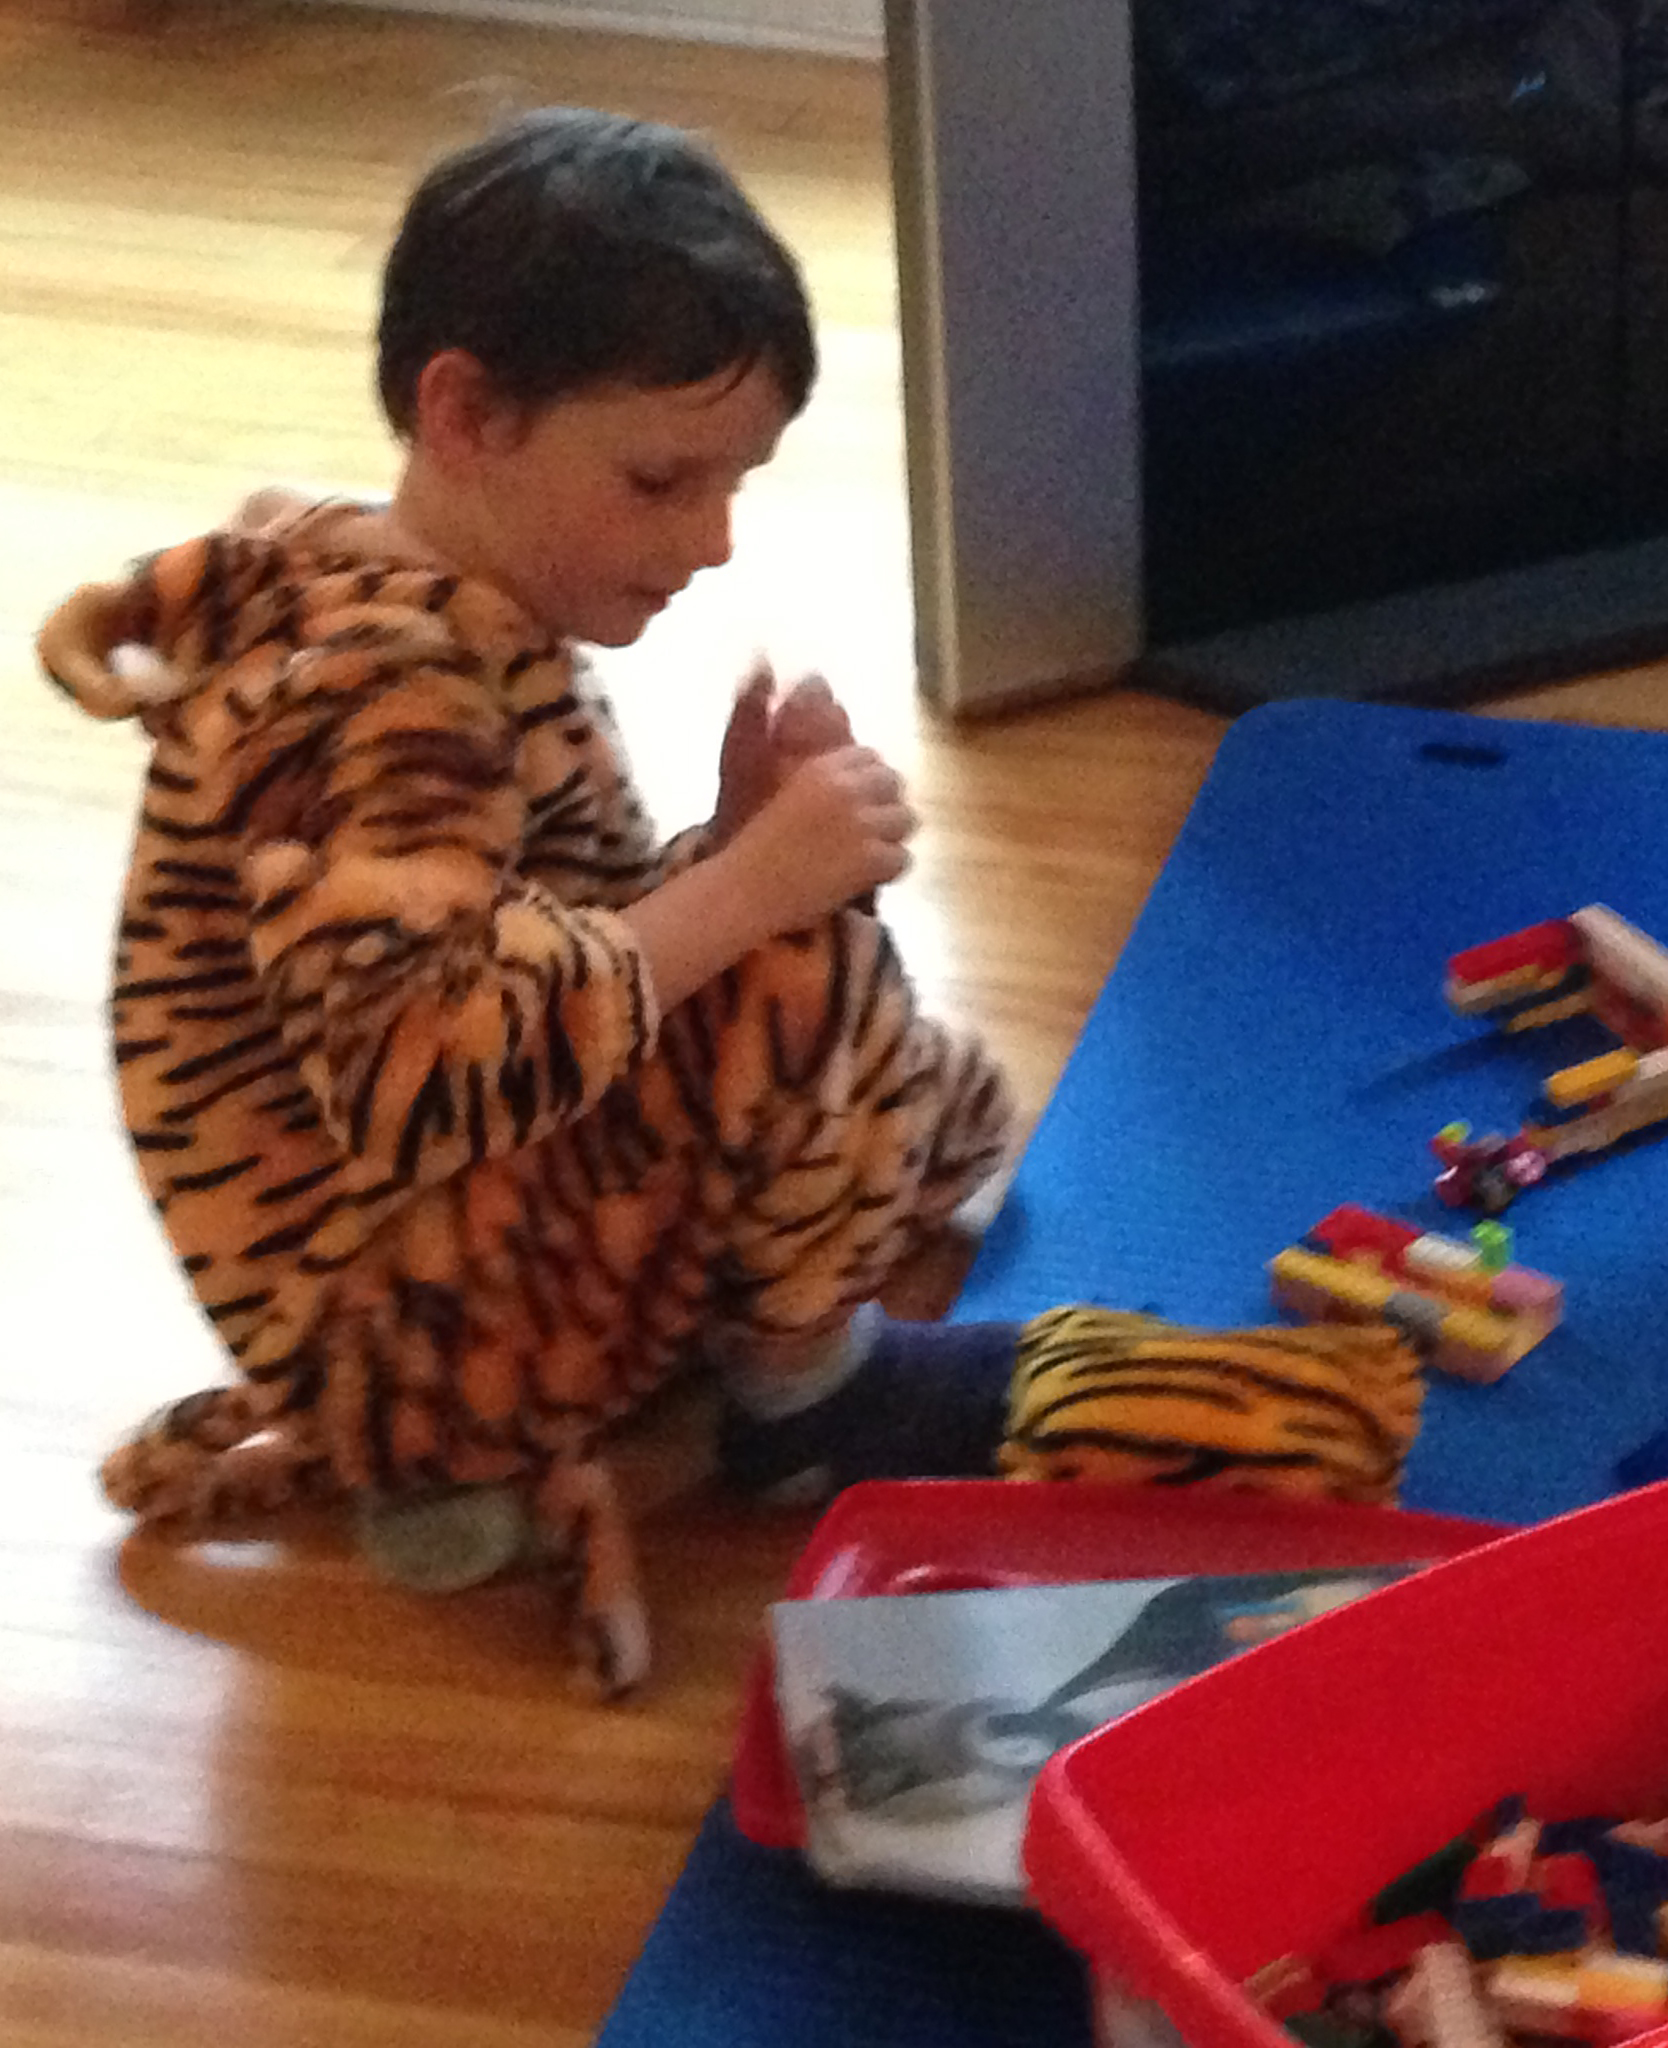 David, as a tiger, going rogue with free-form Lego.